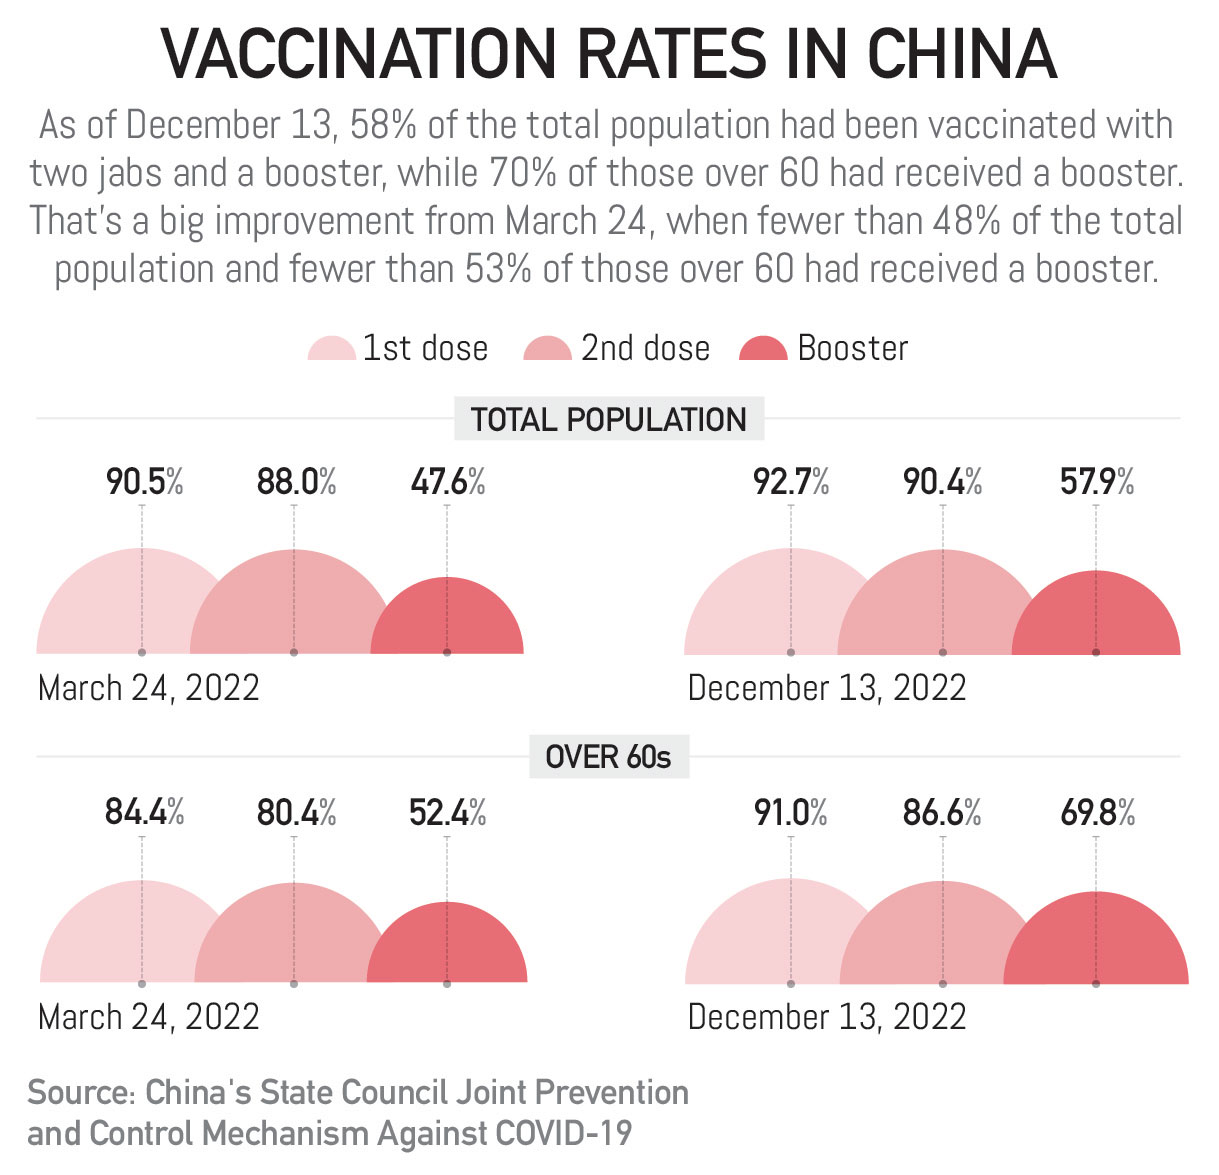 China's COVID-19 fight in numbers: Vaccination rates in China